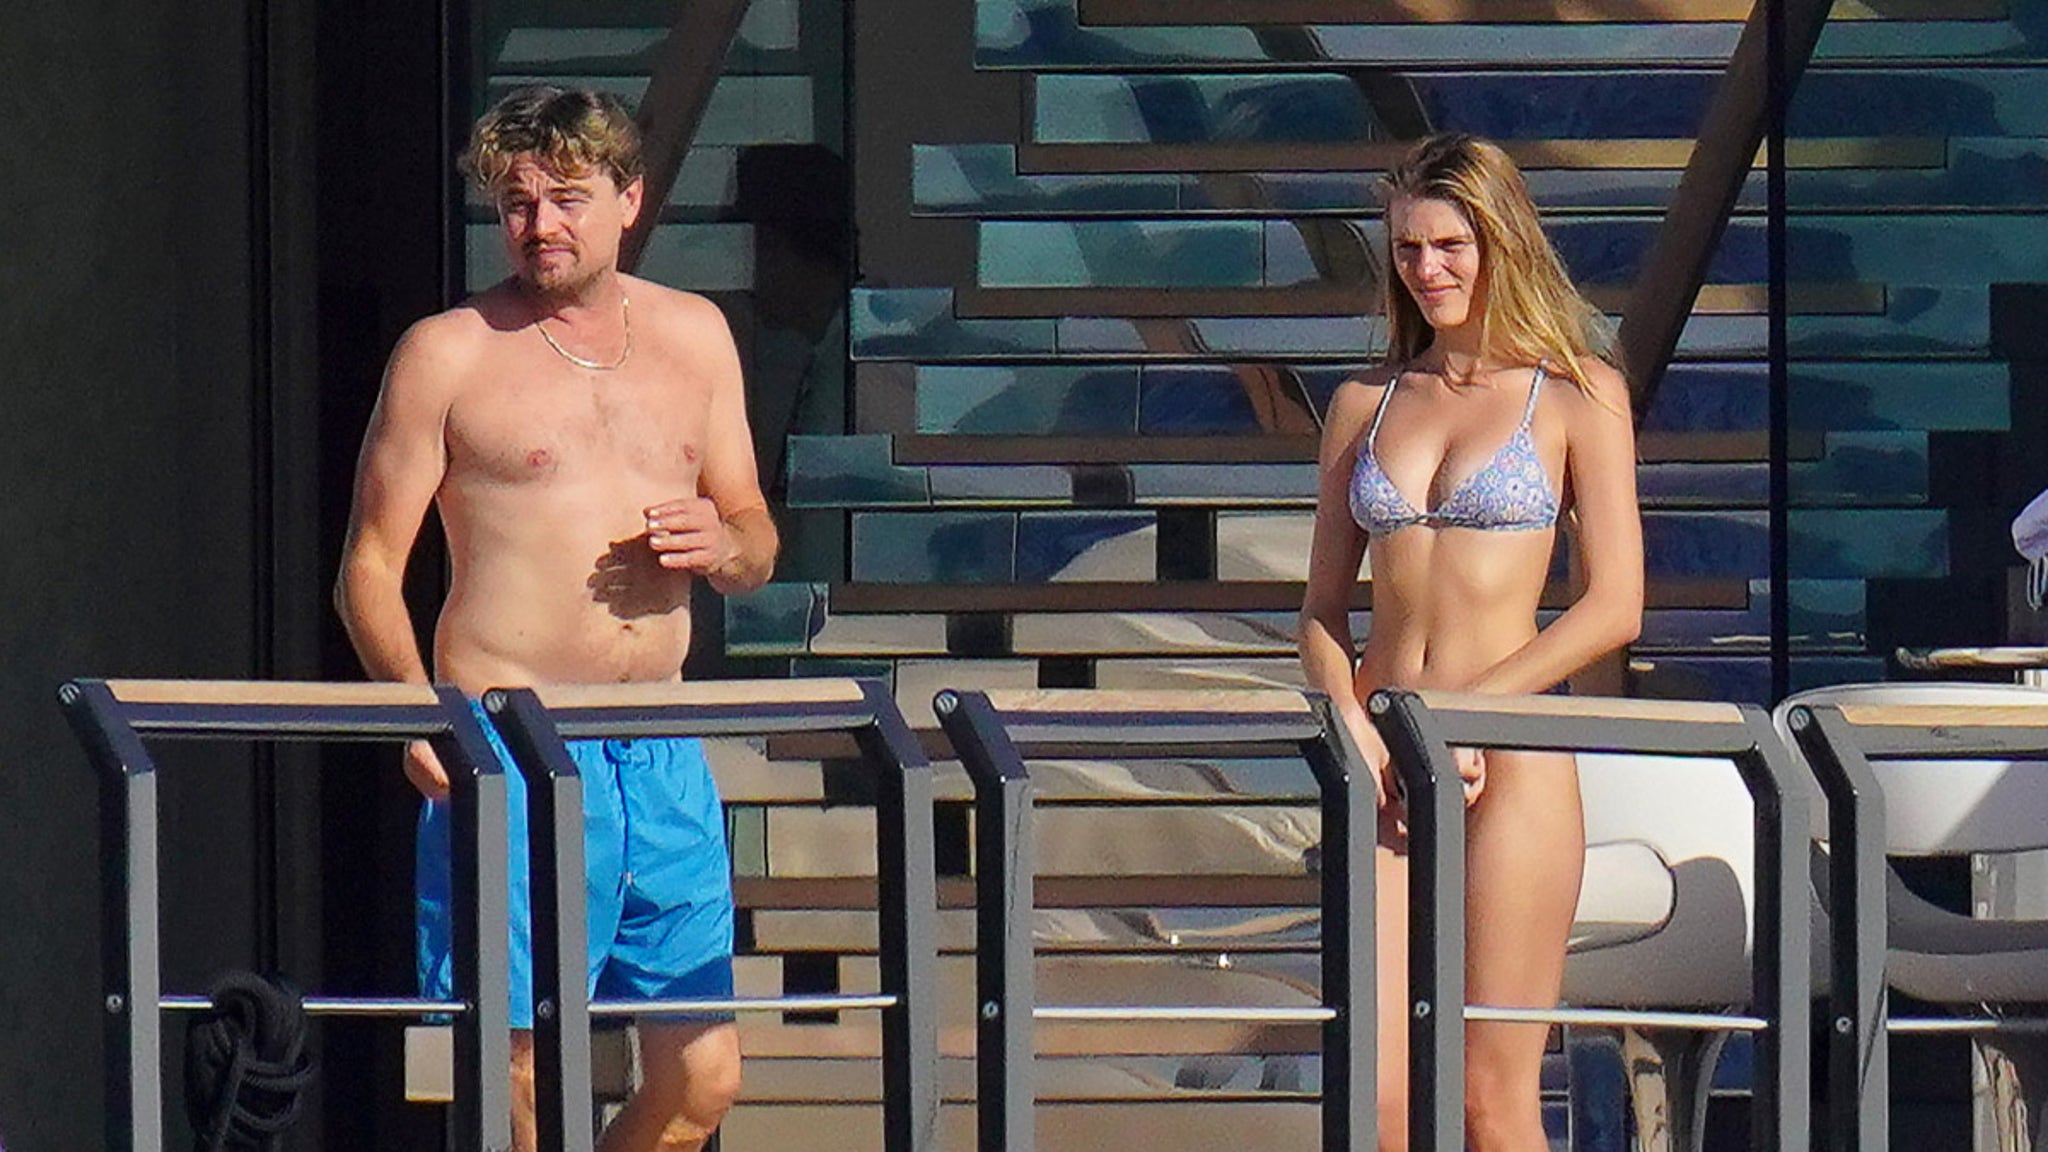 Leonardo DiCaprio entertains several women on a yacht while on vacation in St. Barths